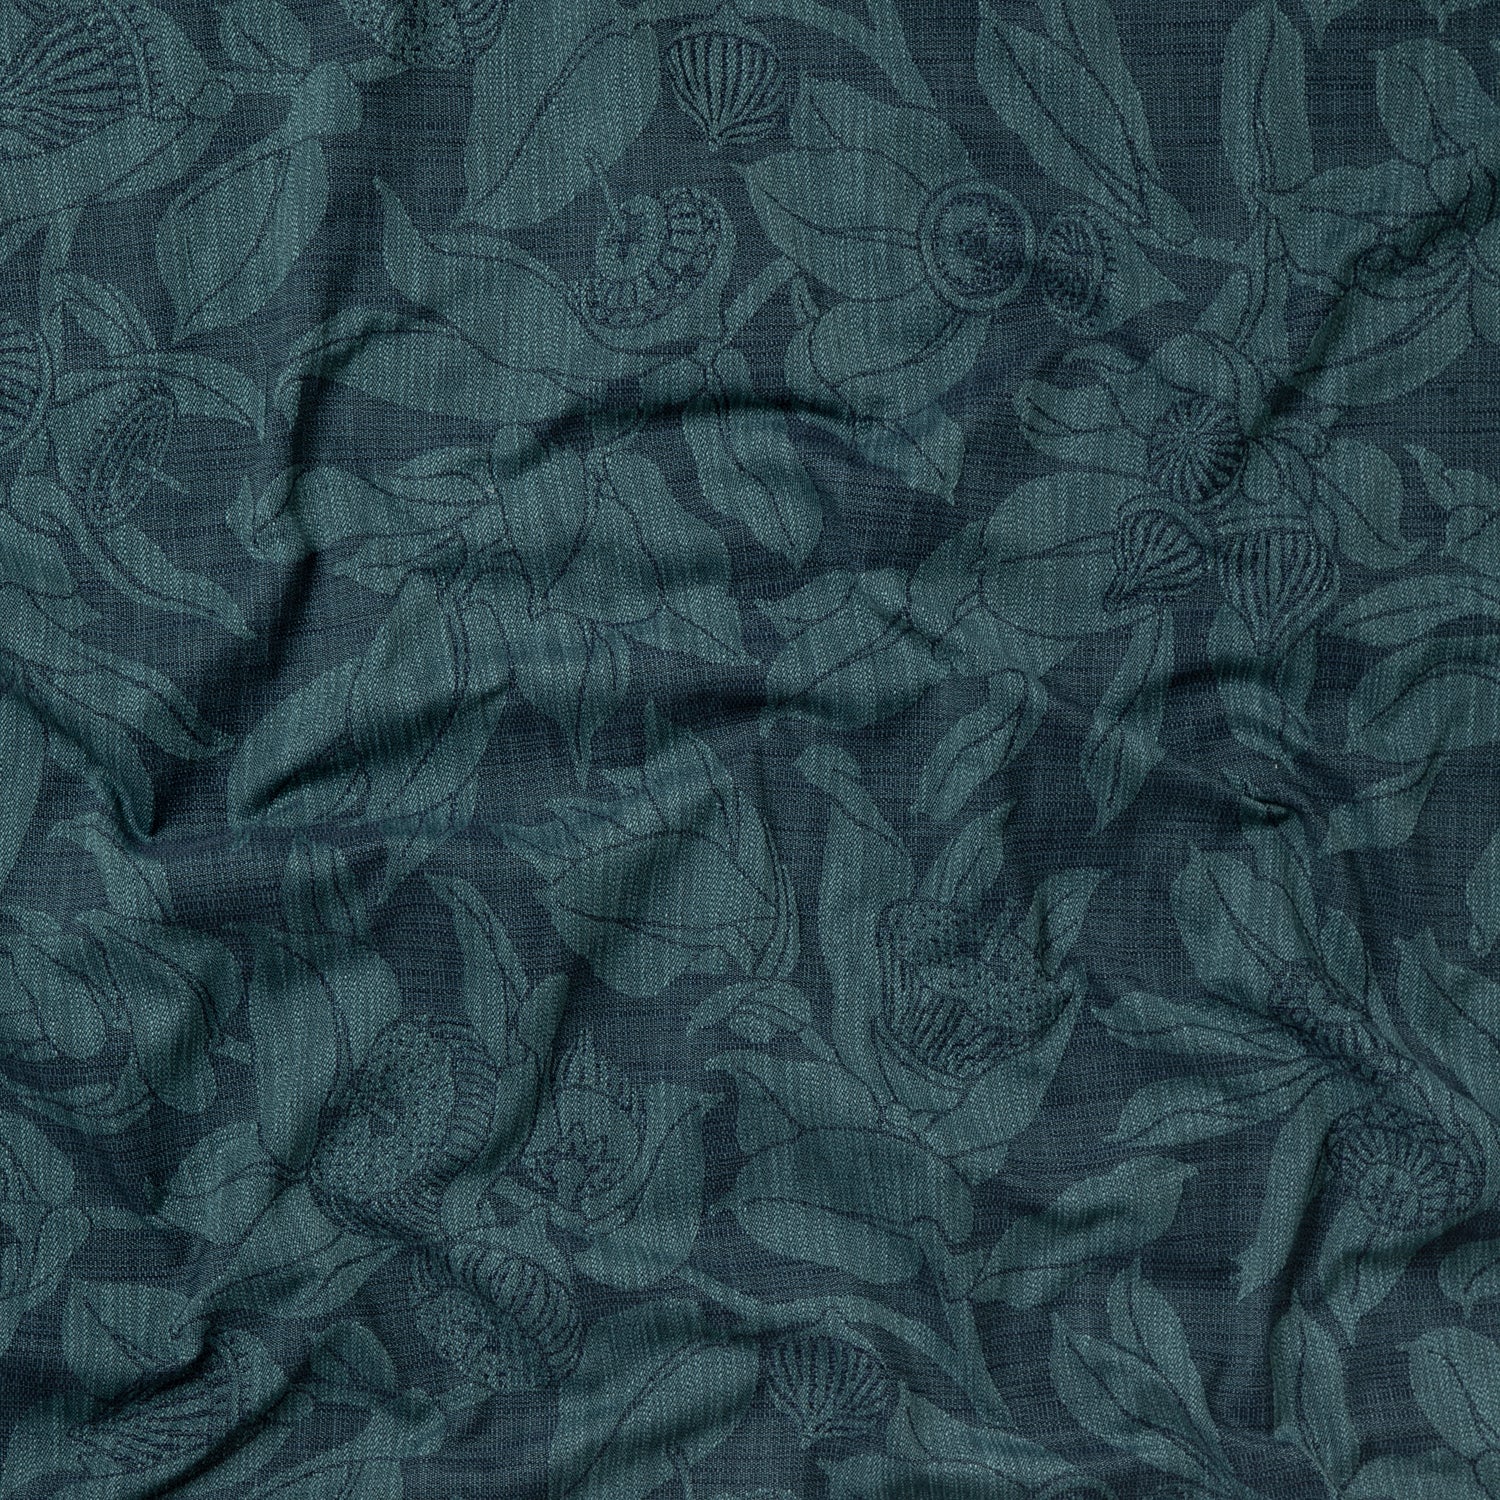 Draped fabric in a leaf and bud print in dark blue on a navy field.